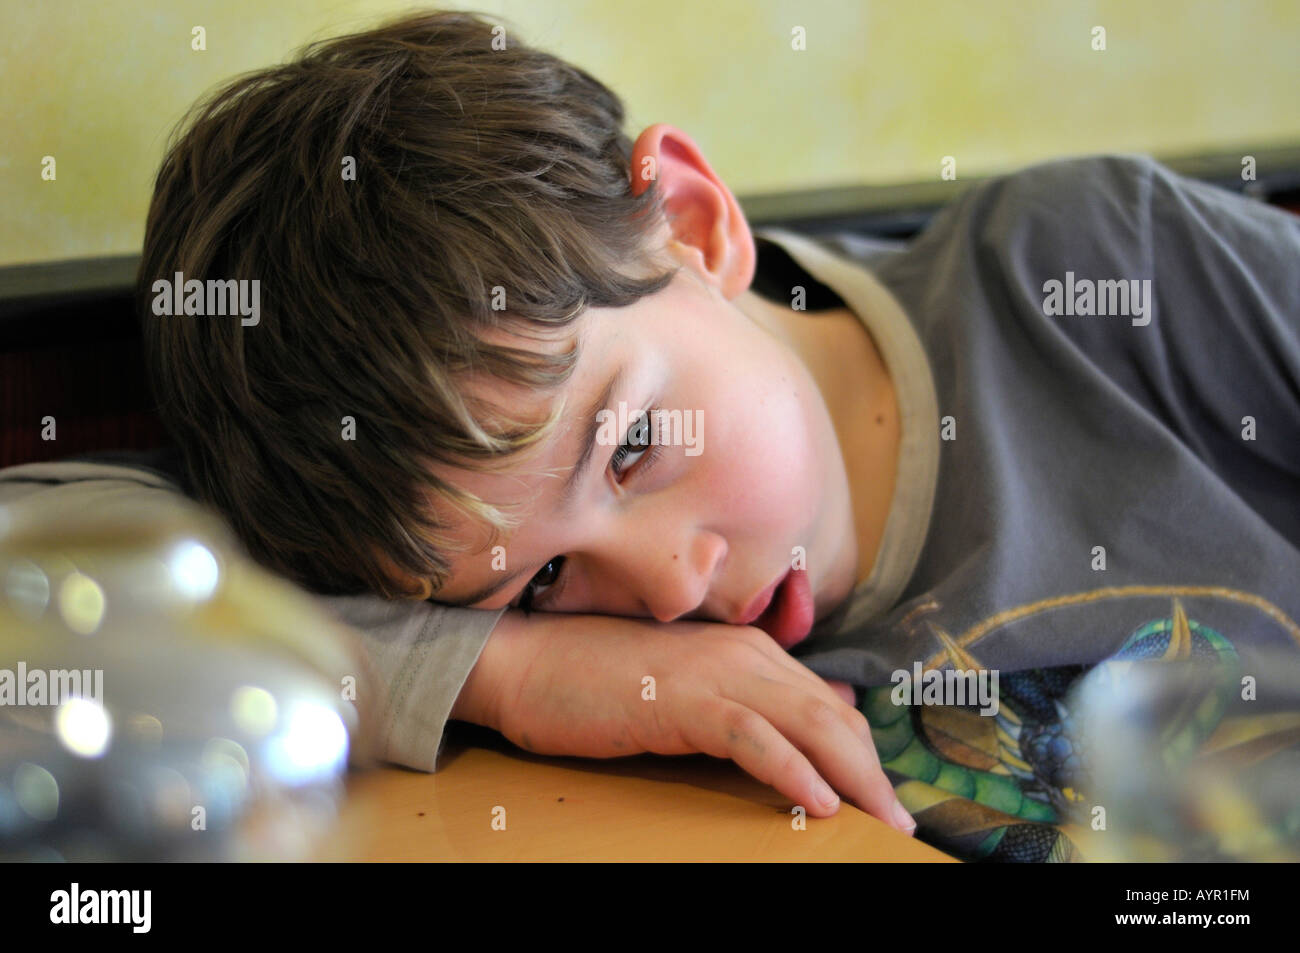 Boy, 9 years old, tired, bored, thoughtful Stock Photo